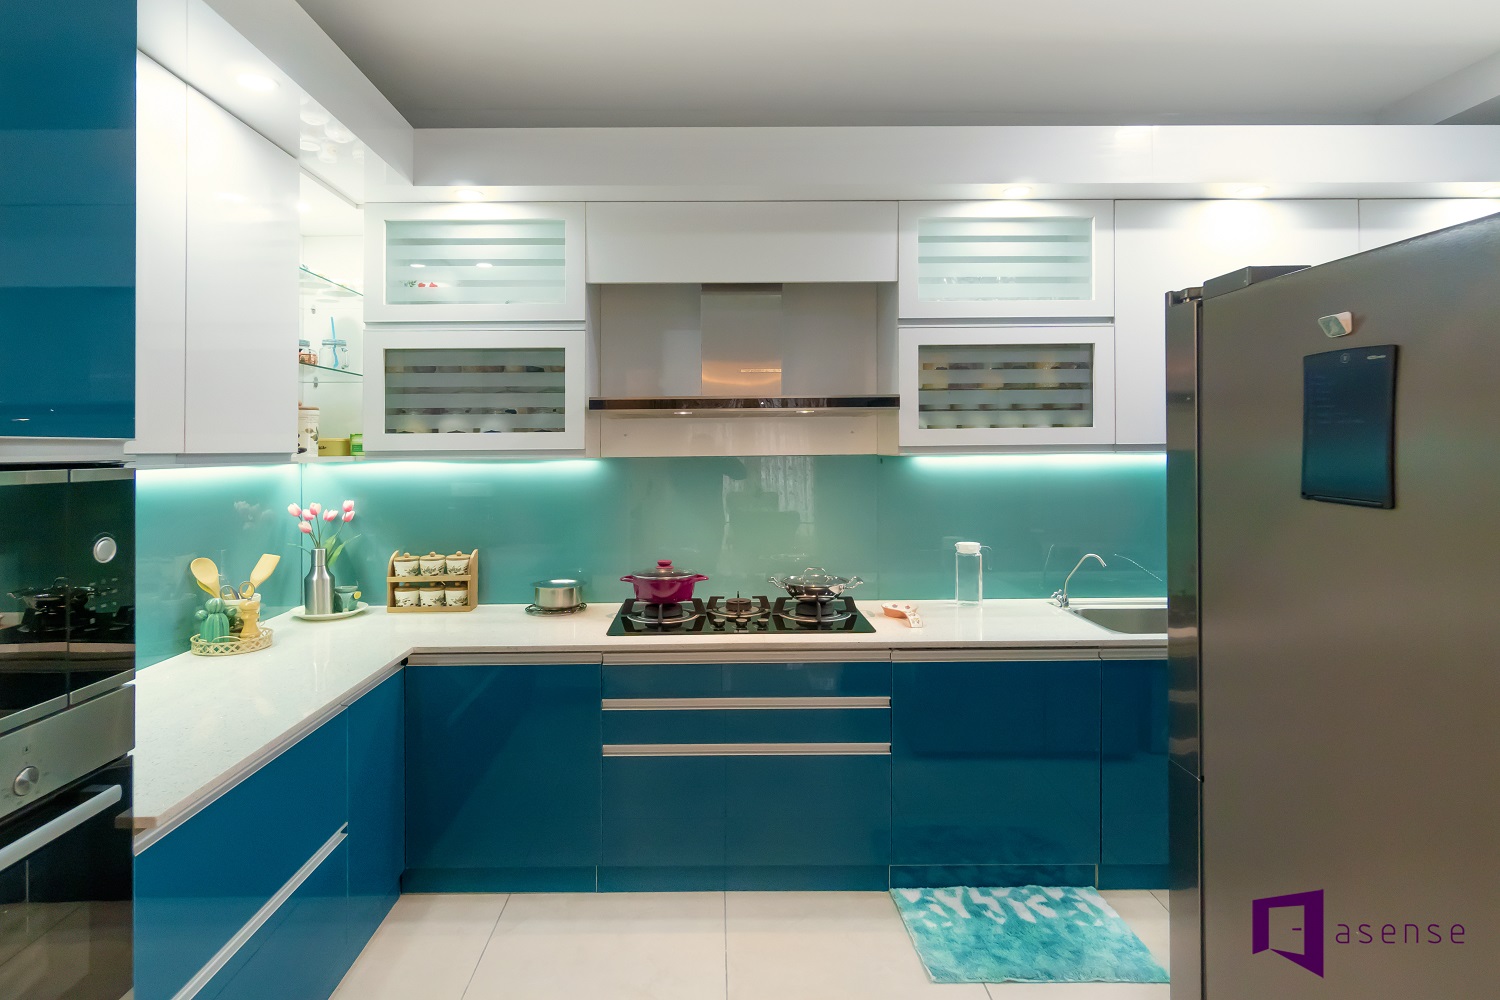 Choosing the Right Materials for Your Cabinets